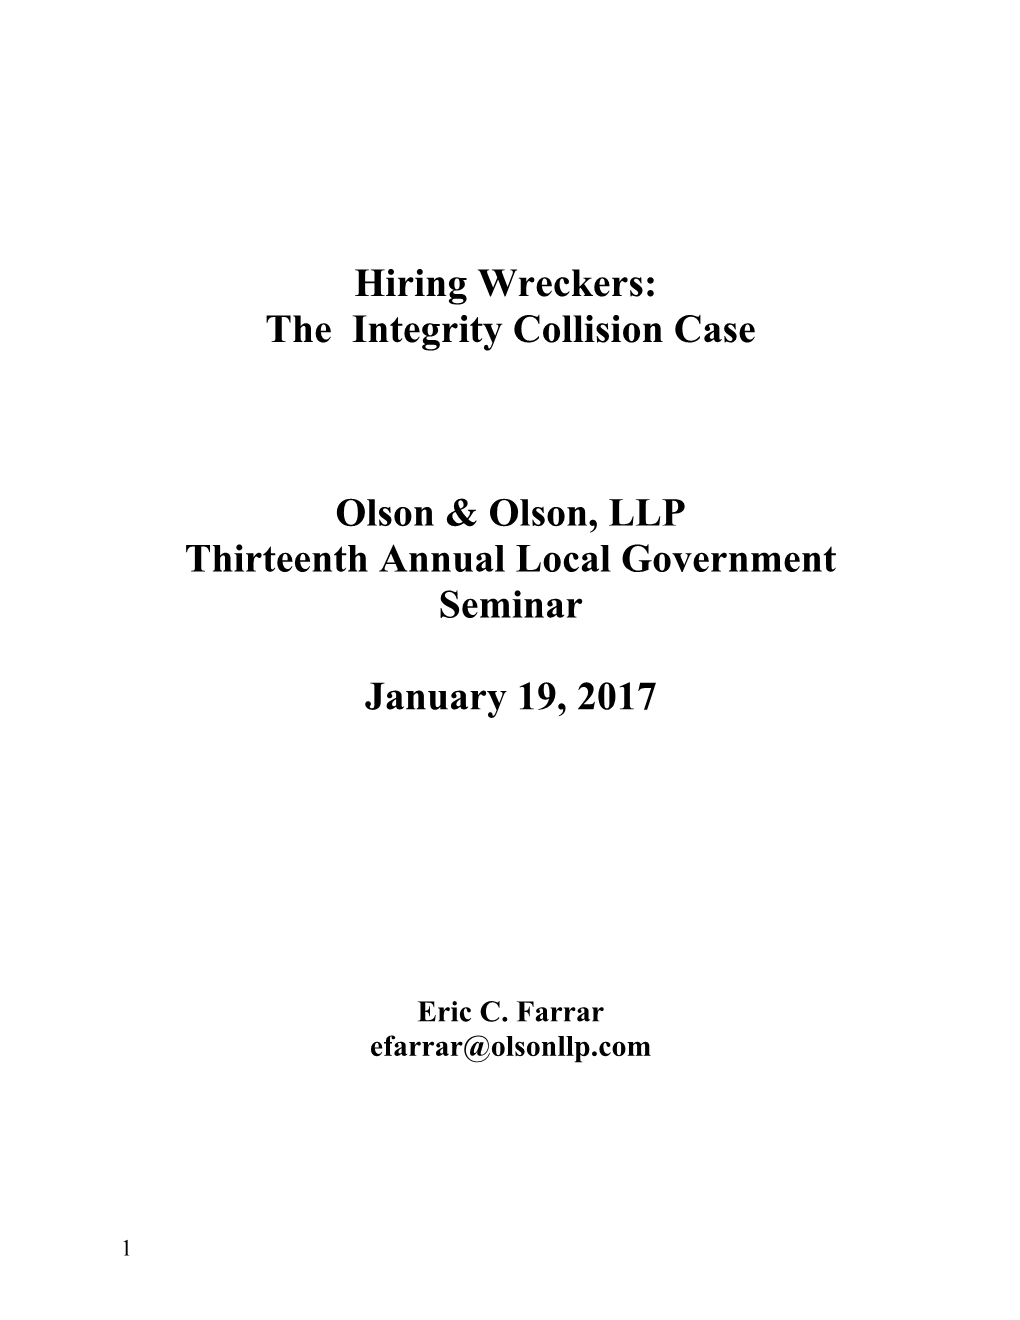 The Integrity Collision Case